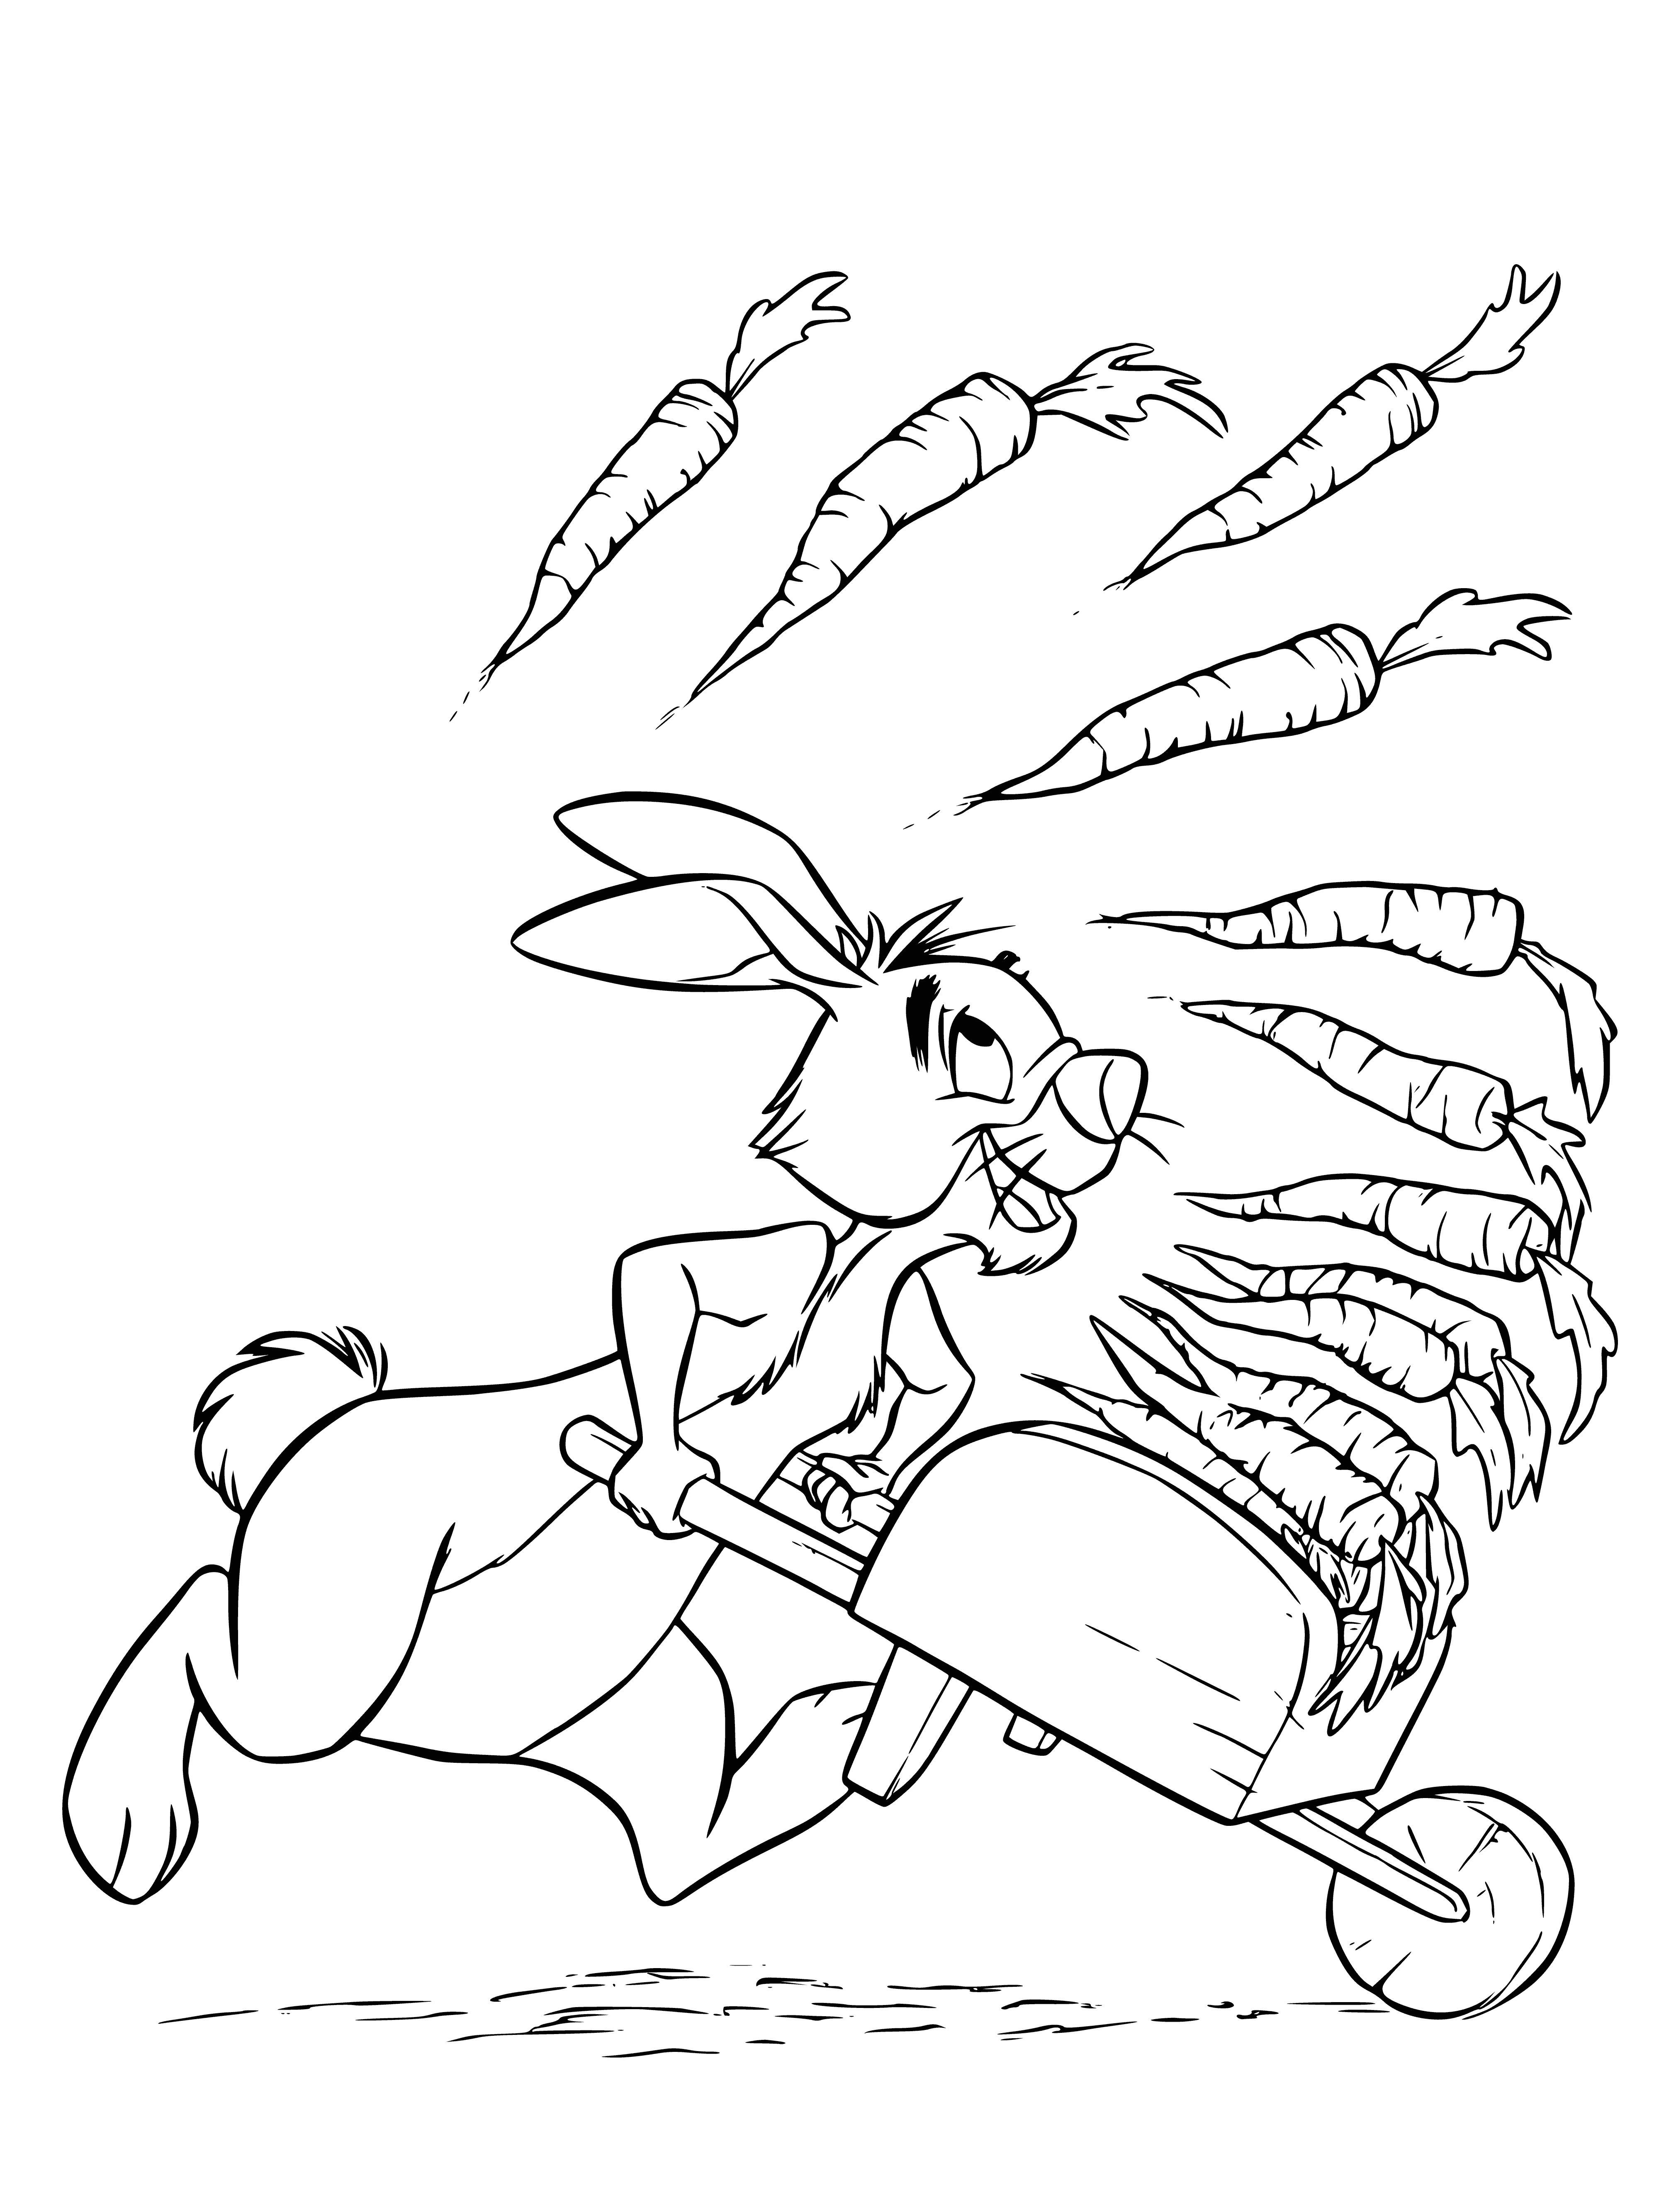 coloring page: Winnie and Rabbit in a field w/ a big tree. Pooh has a basket, Rabbit has a carrot. Both smiling. #WinnieThePooh #RabbitLove